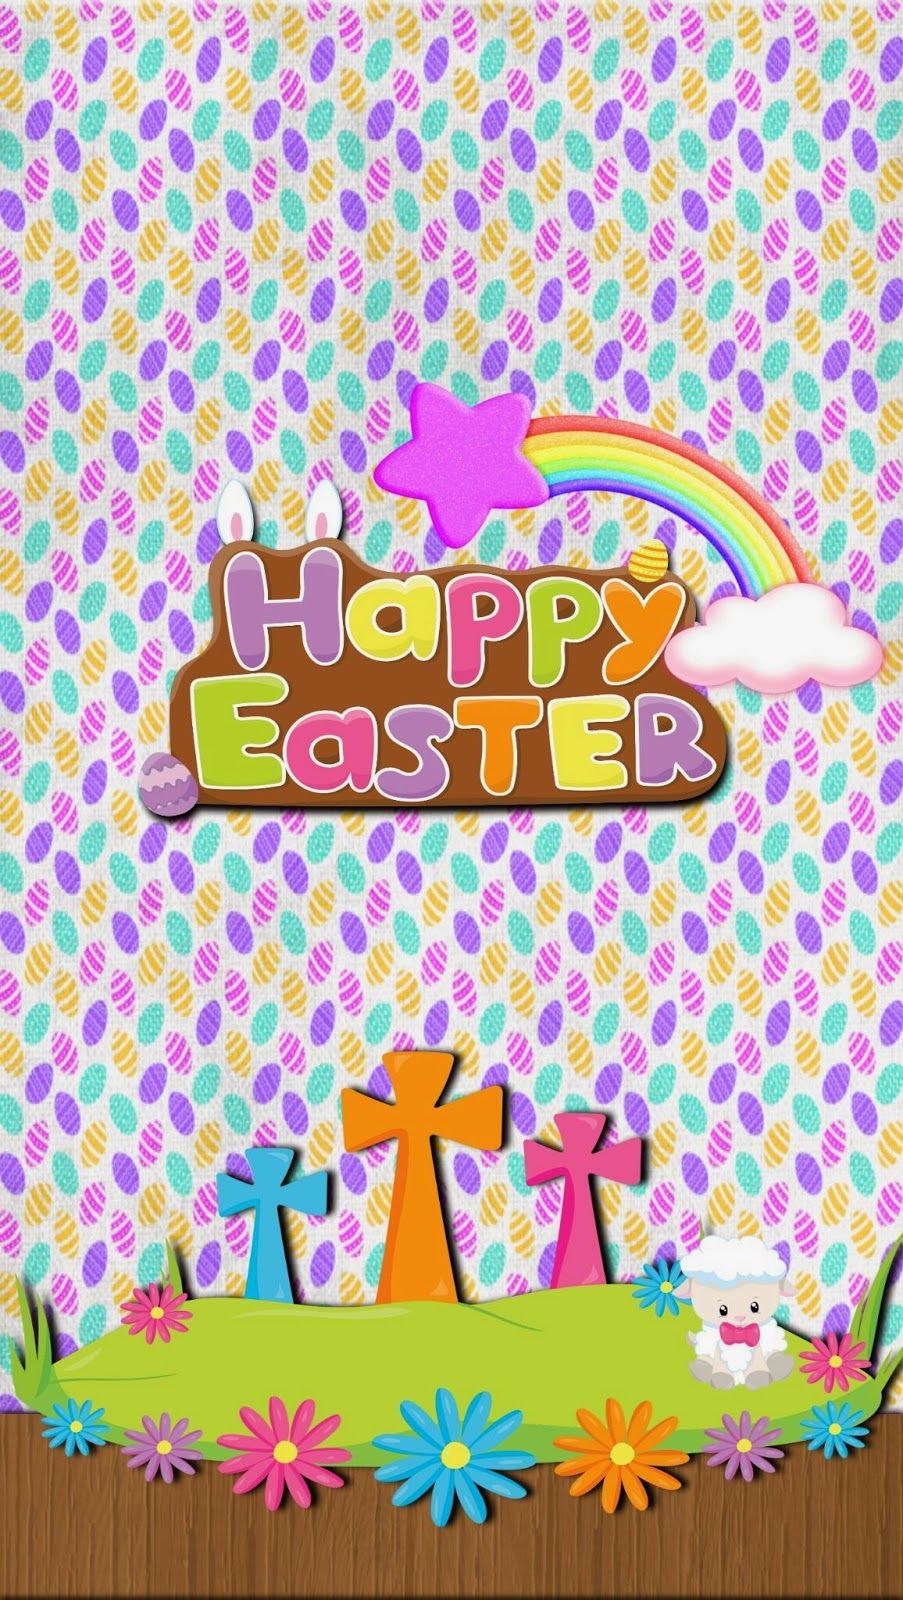 Happy Good Friday:). Easter wallpaper, Happy good friday, Easter cards printable